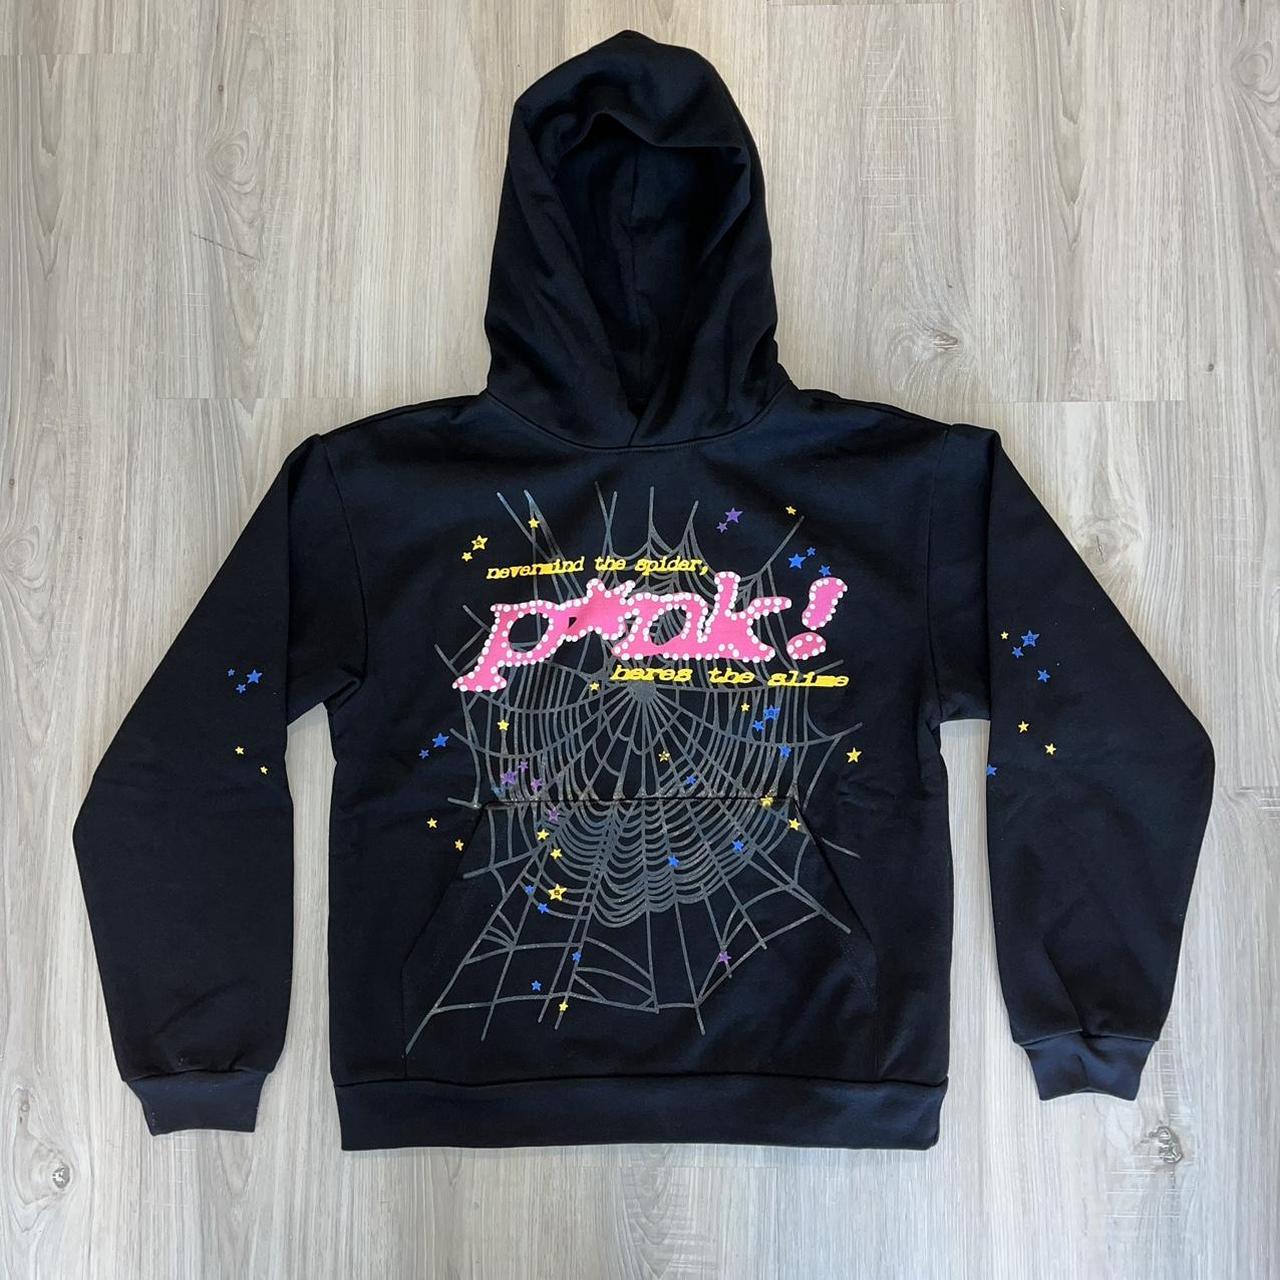 YOUNG THUG SP5DER P*NK HOODIE AUTHENTIC - MESSAGE... - Depop